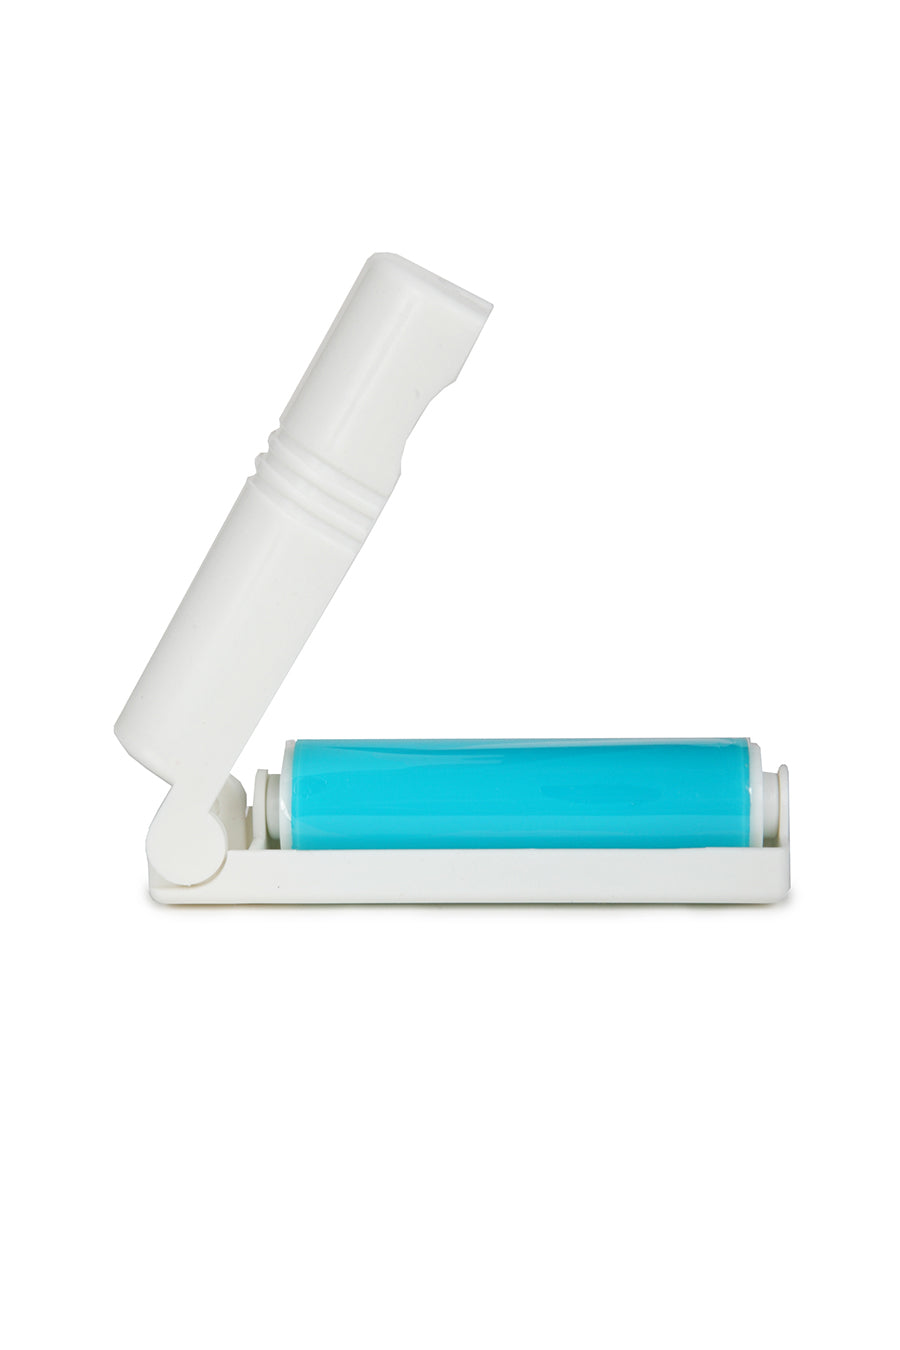 Lint roller washable